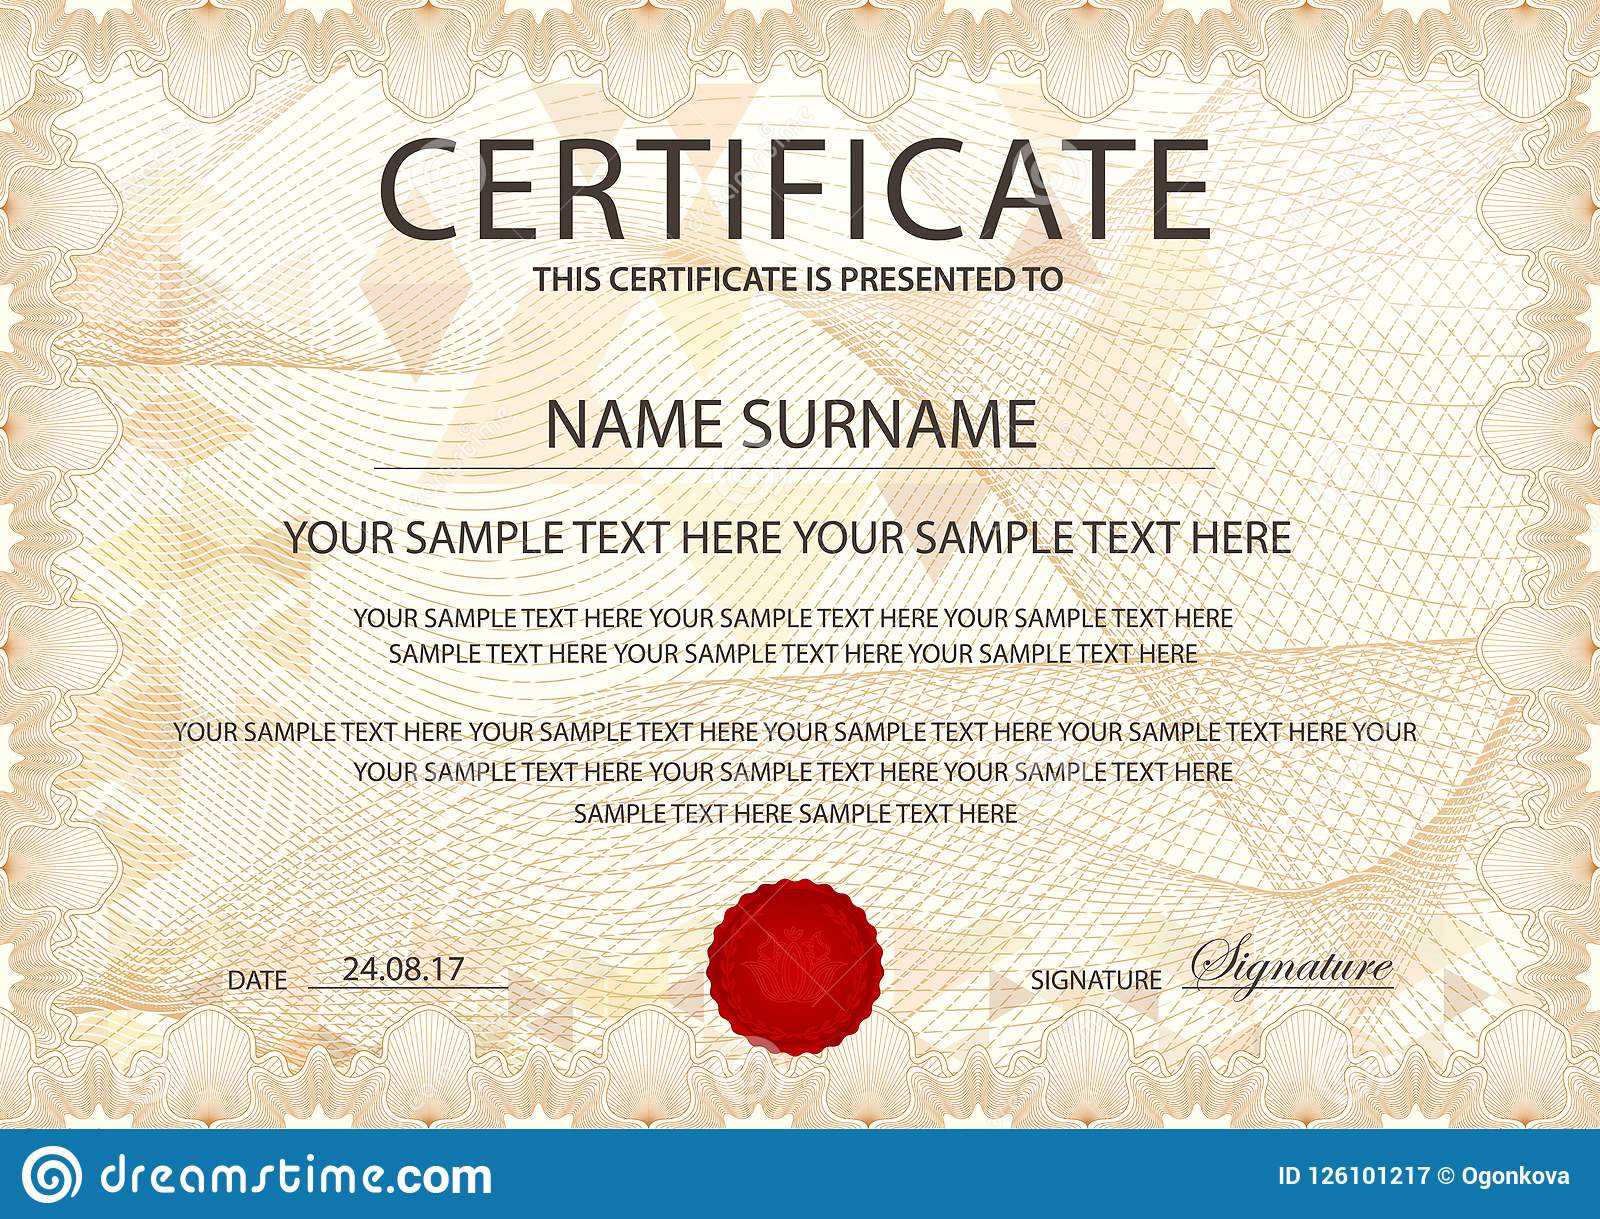 Certificate Template With Guilloche Pattern, Frame Border For First Place Certificate Template